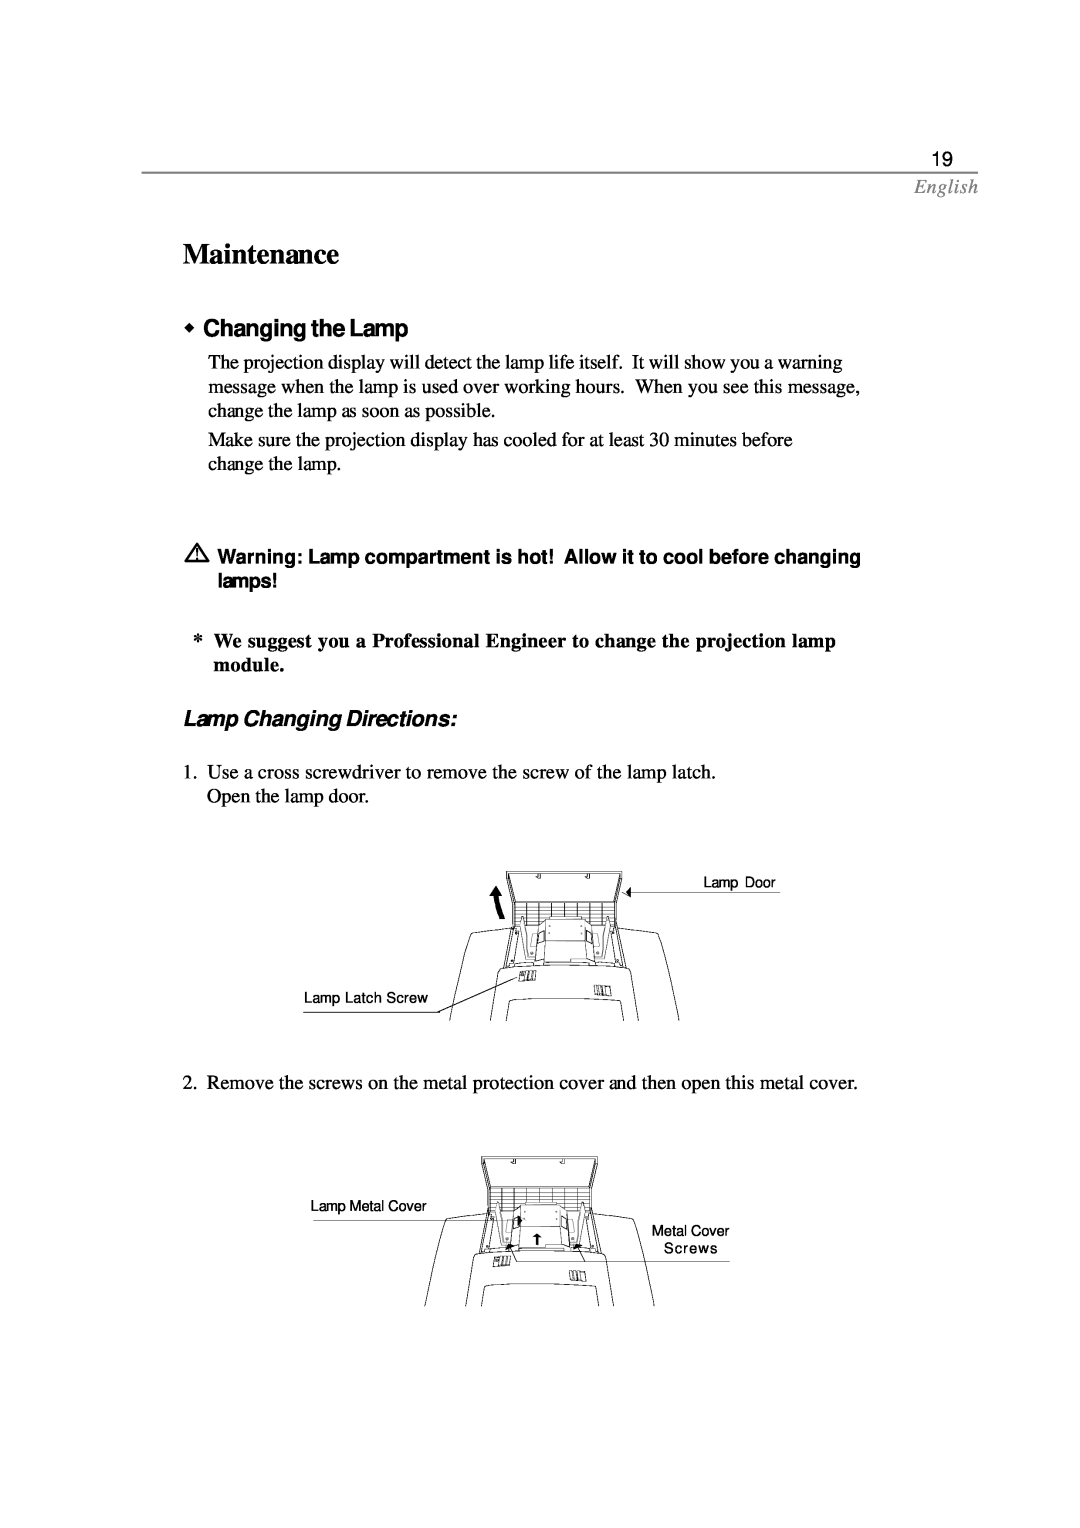 Optoma Technology EP585 specifications Maintenance, w Changing the Lamp, Lamp Changing Directions, English 